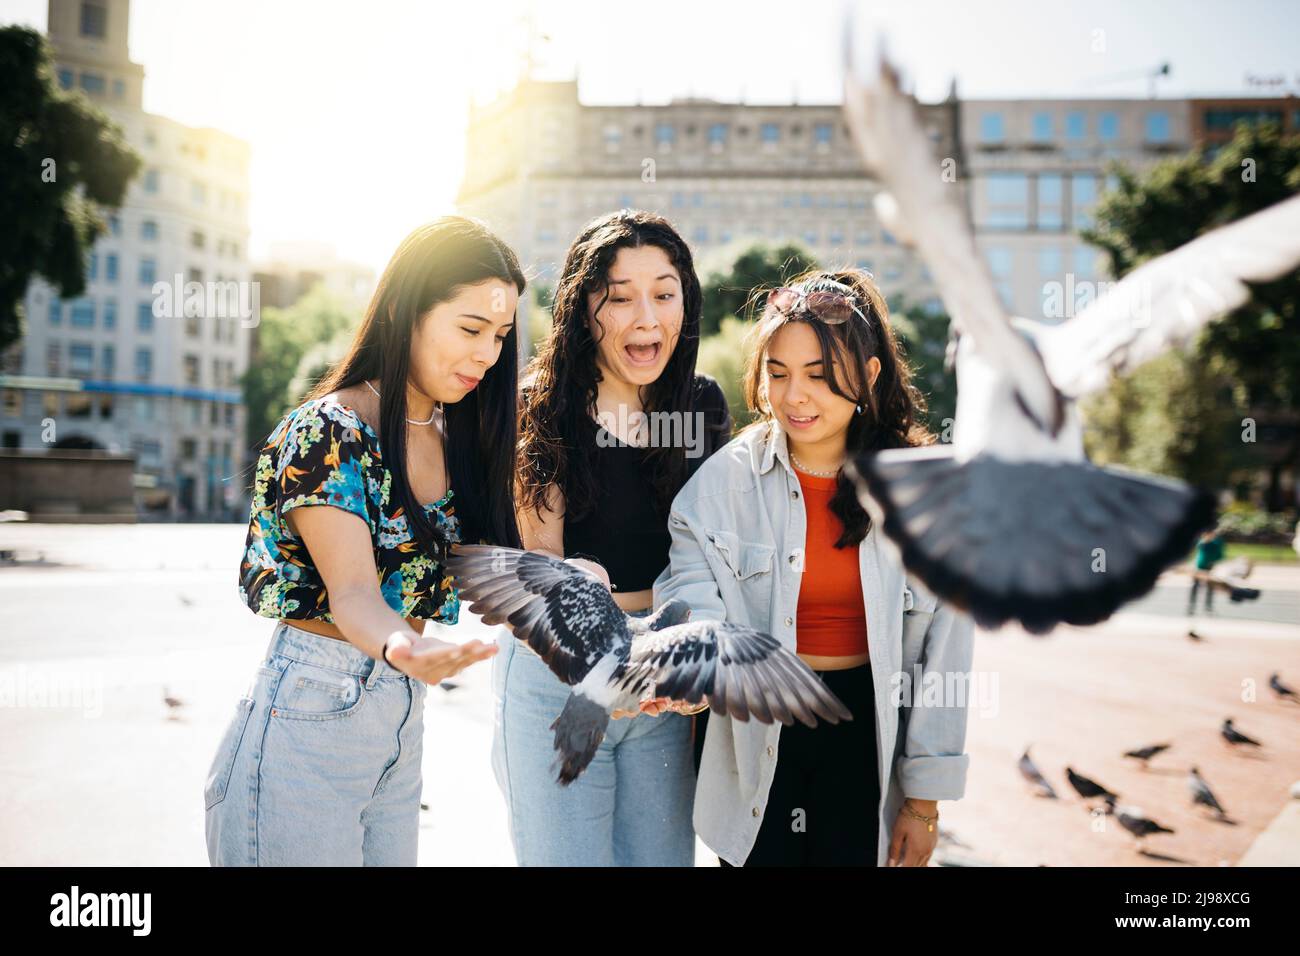 Three young women feeding pigeons in a square of a city Stock Photo